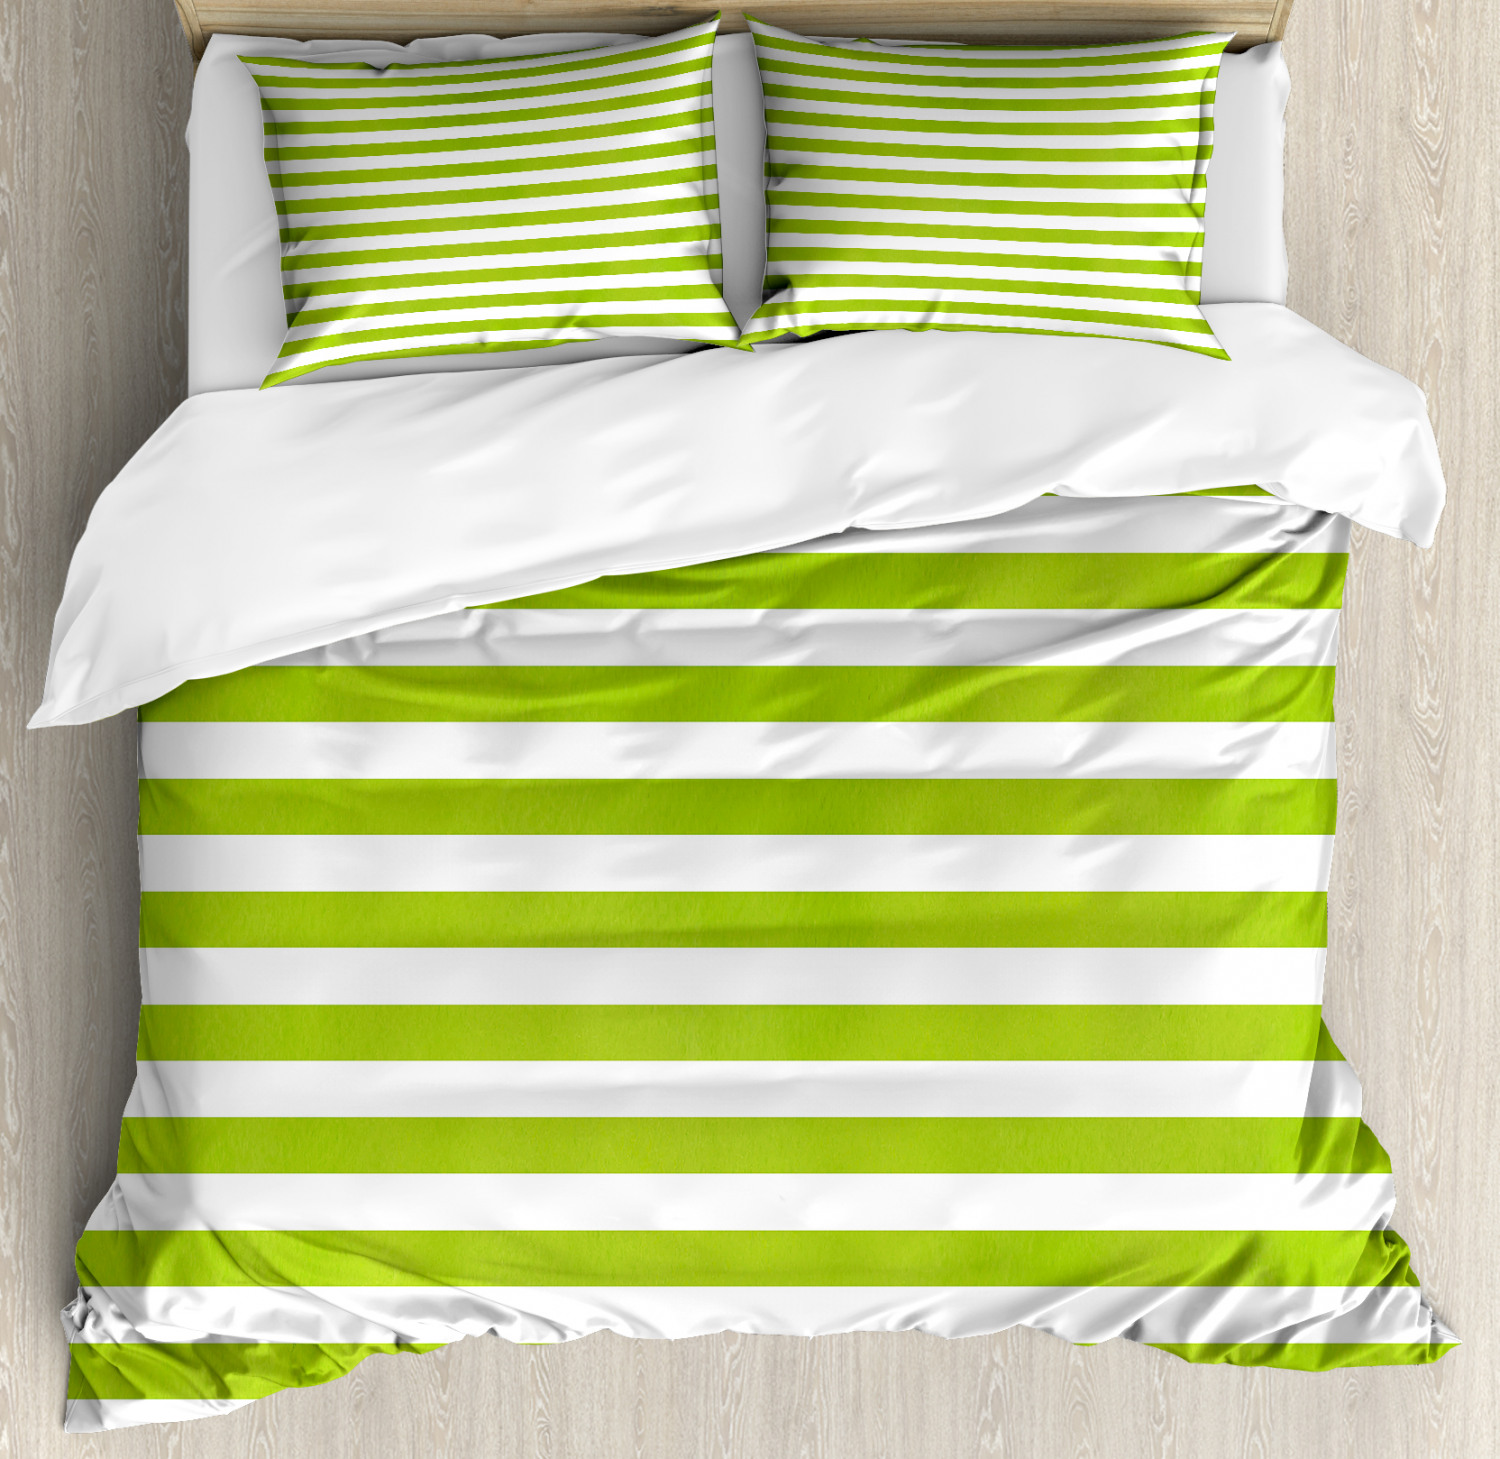 Lime Green Duvet Cover Set With Pillow Shams Watercolor Lines